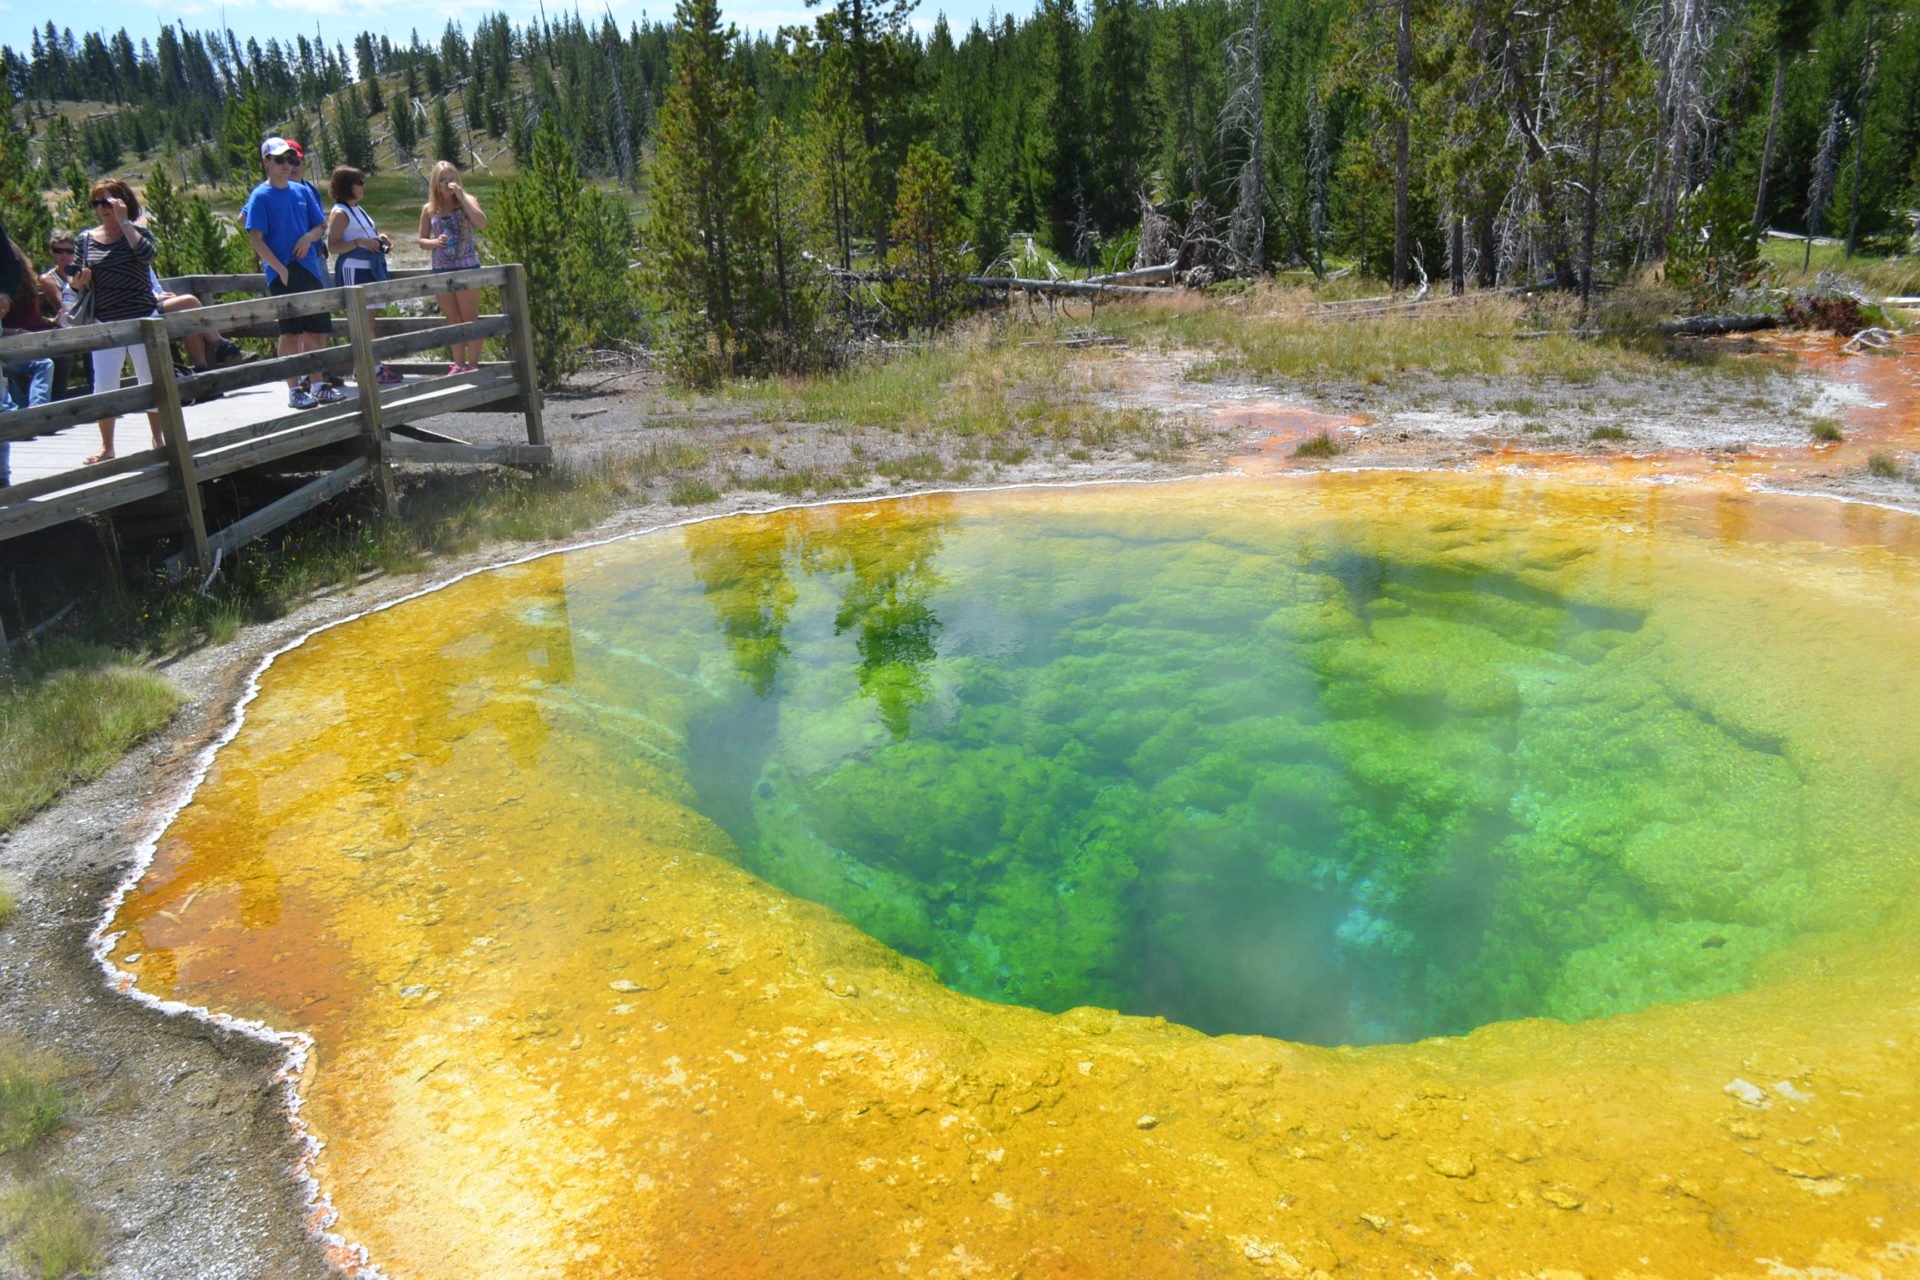 Man who ‘dissolved’ in Yellowstone’s ‘boiling acidic waters’ was ‘hot-potting’